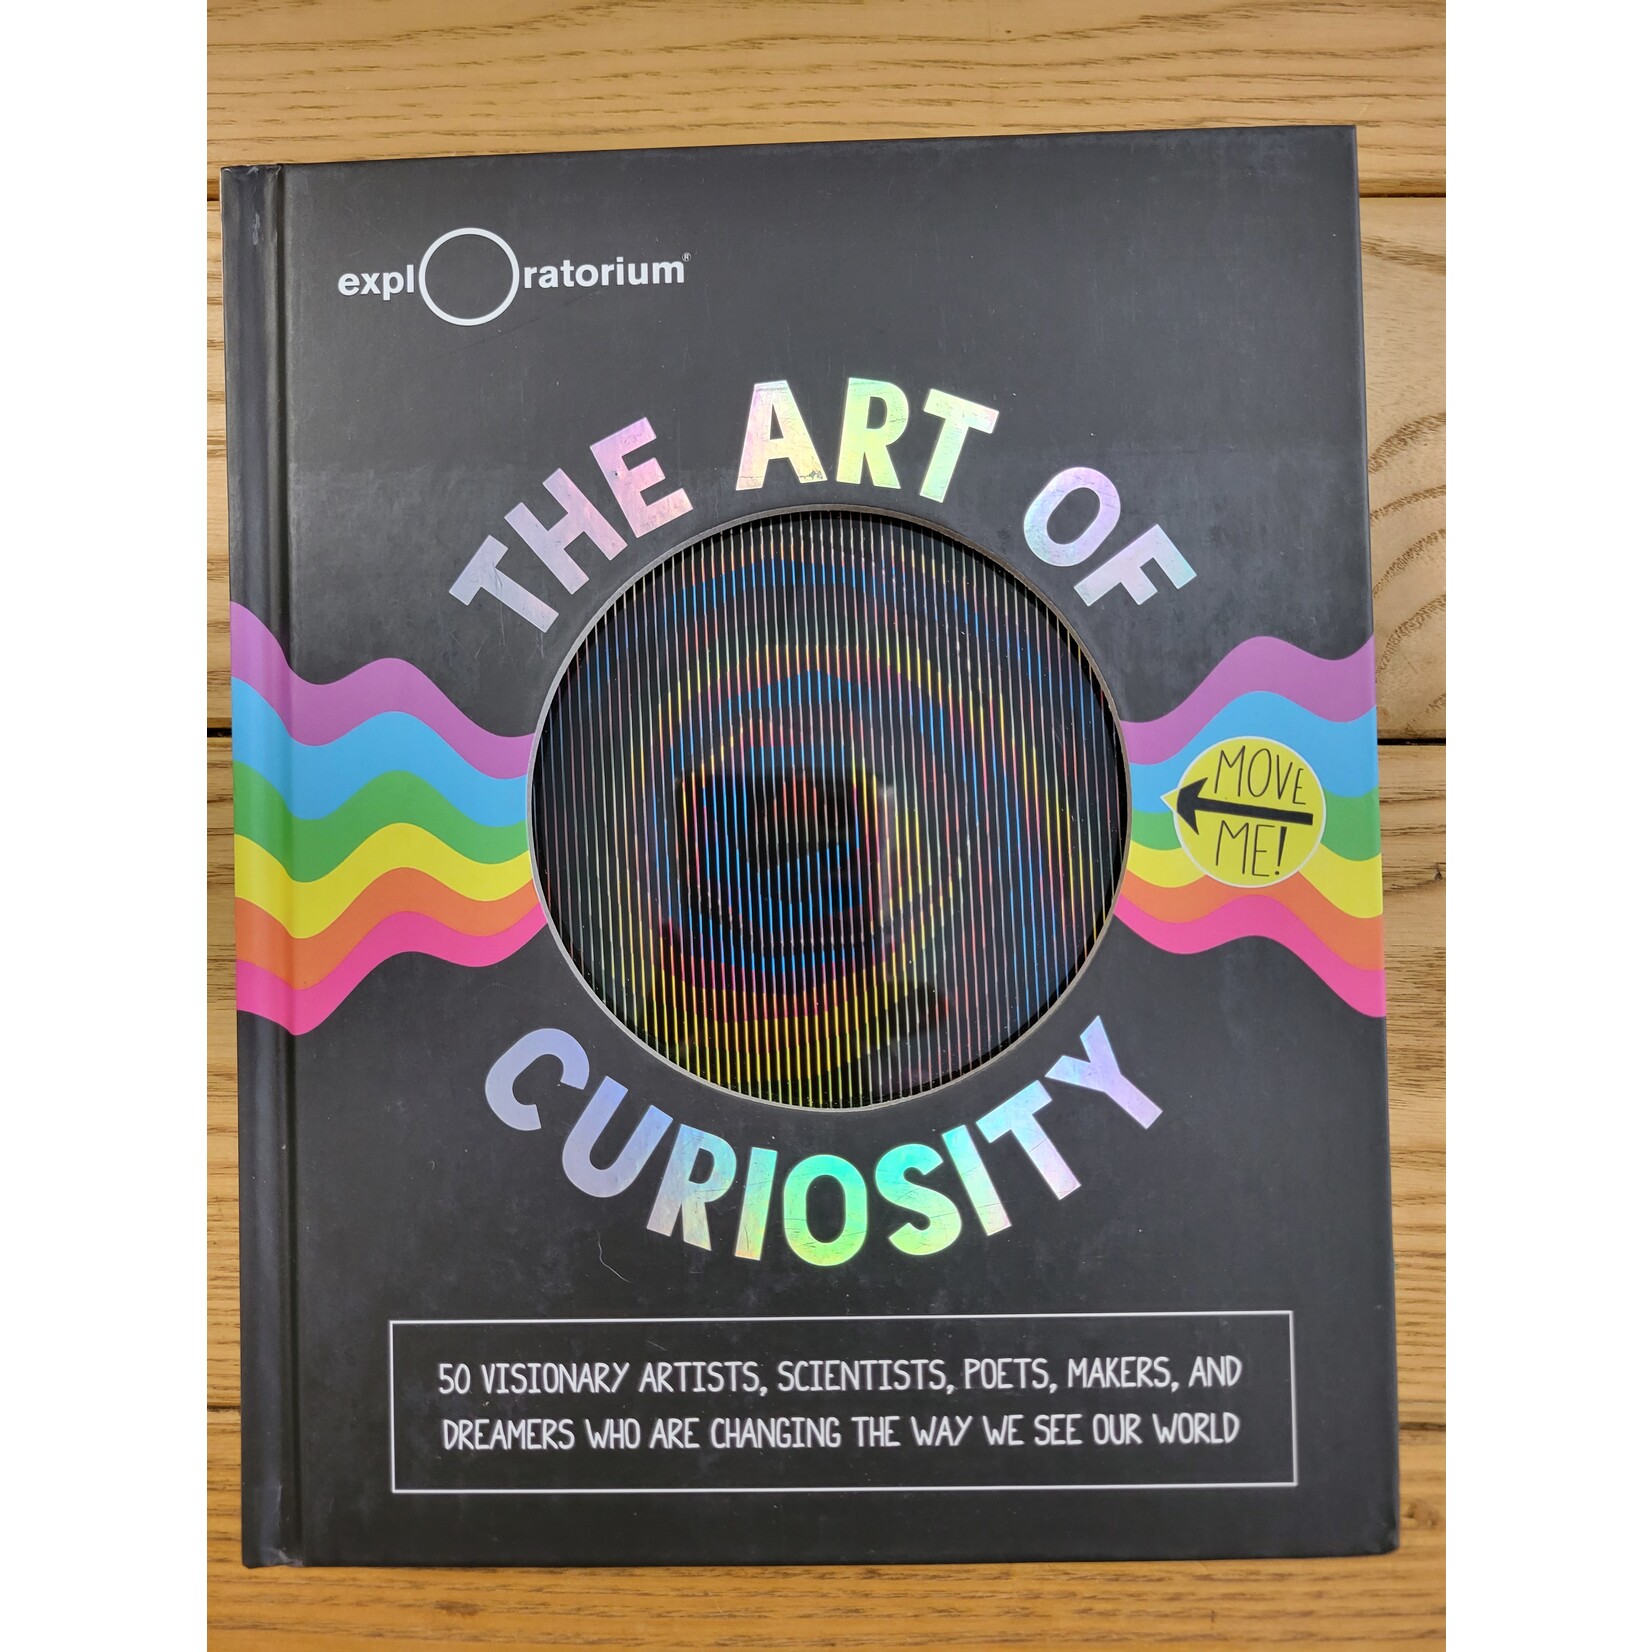 The Art of Curiosity:  50 Visionary Artists, Scientists, Poets, Makers, and Dreamers Who are Changing the Way We See Our World.